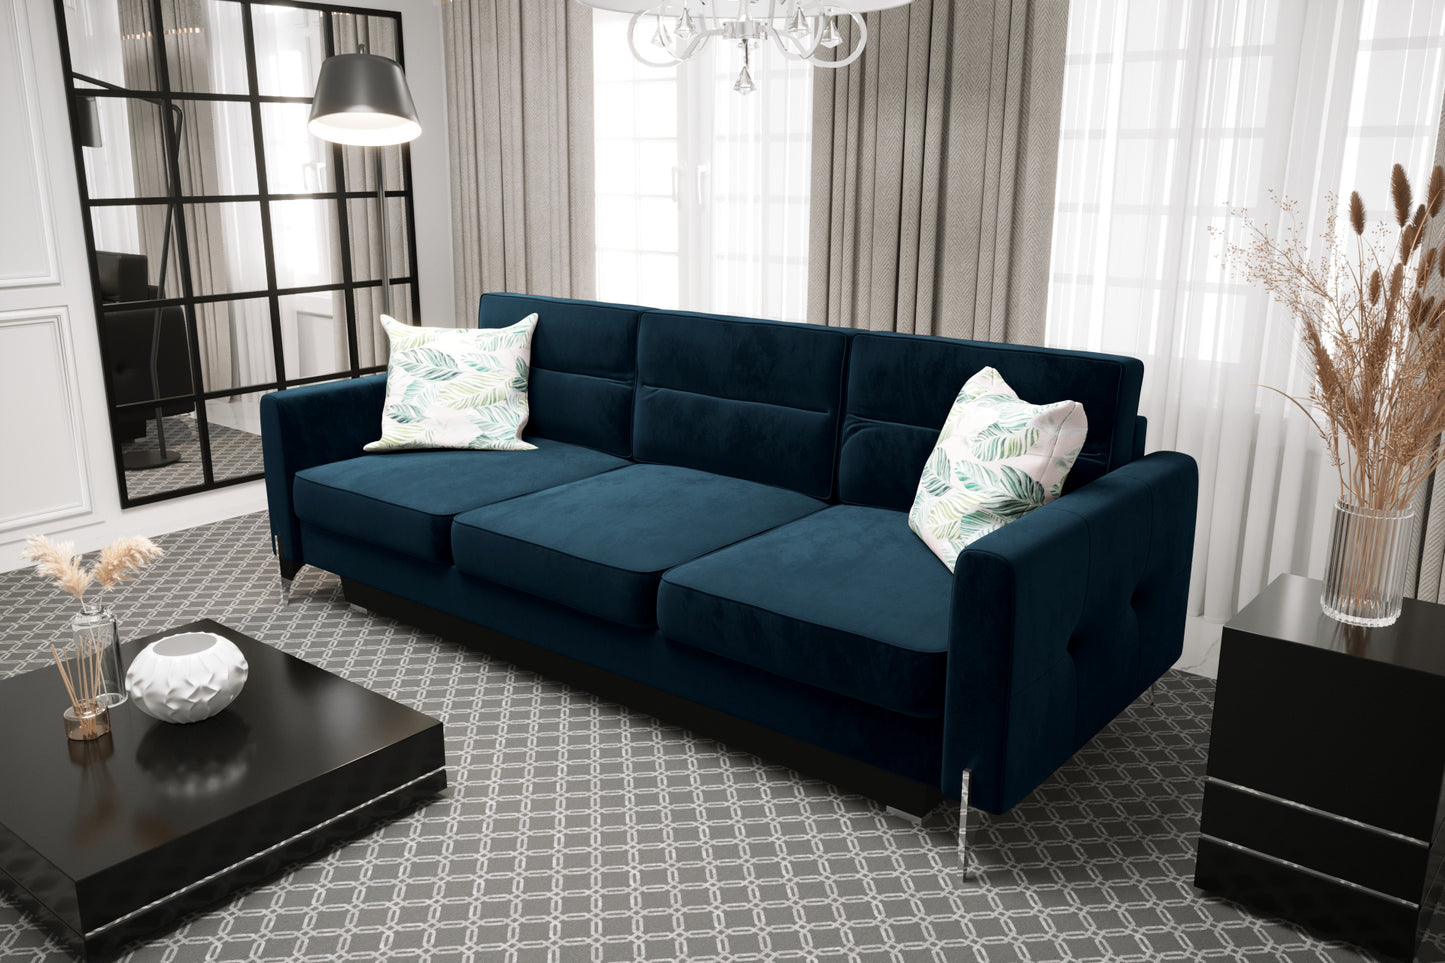 ARTI DL SOFA - Sofa Bed 3 Seater with Sleeping Function Modern  >236cm<